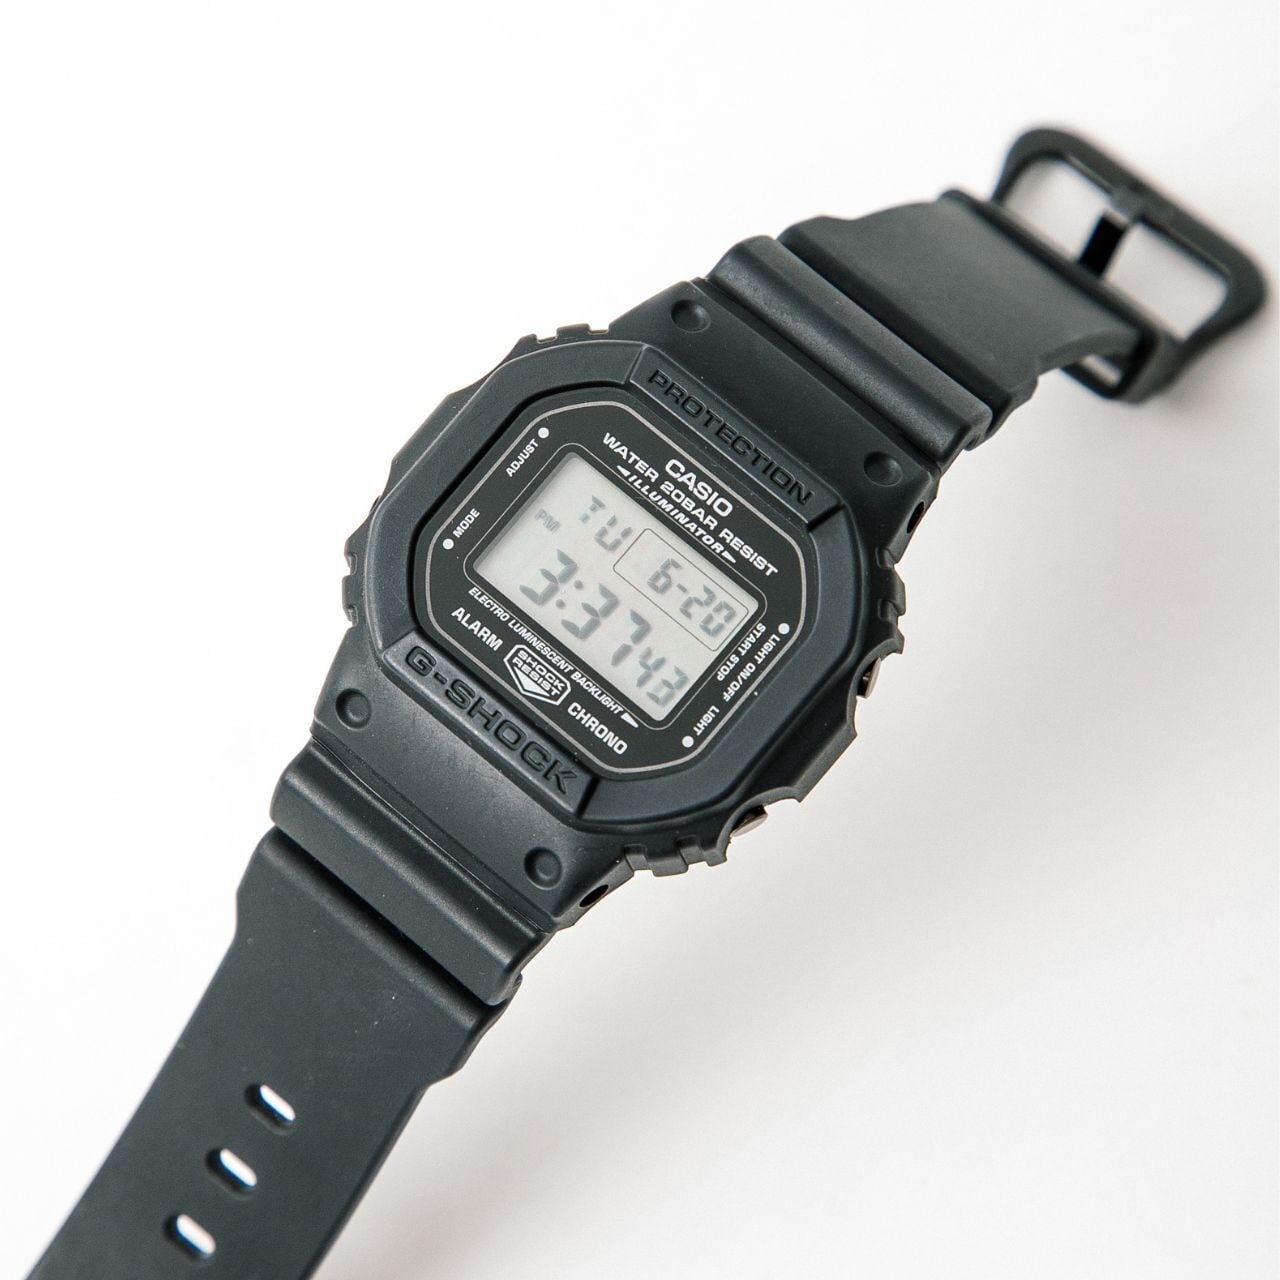 SEE SEE×G-Shock DW5600 | Yes Good Market ONLINE